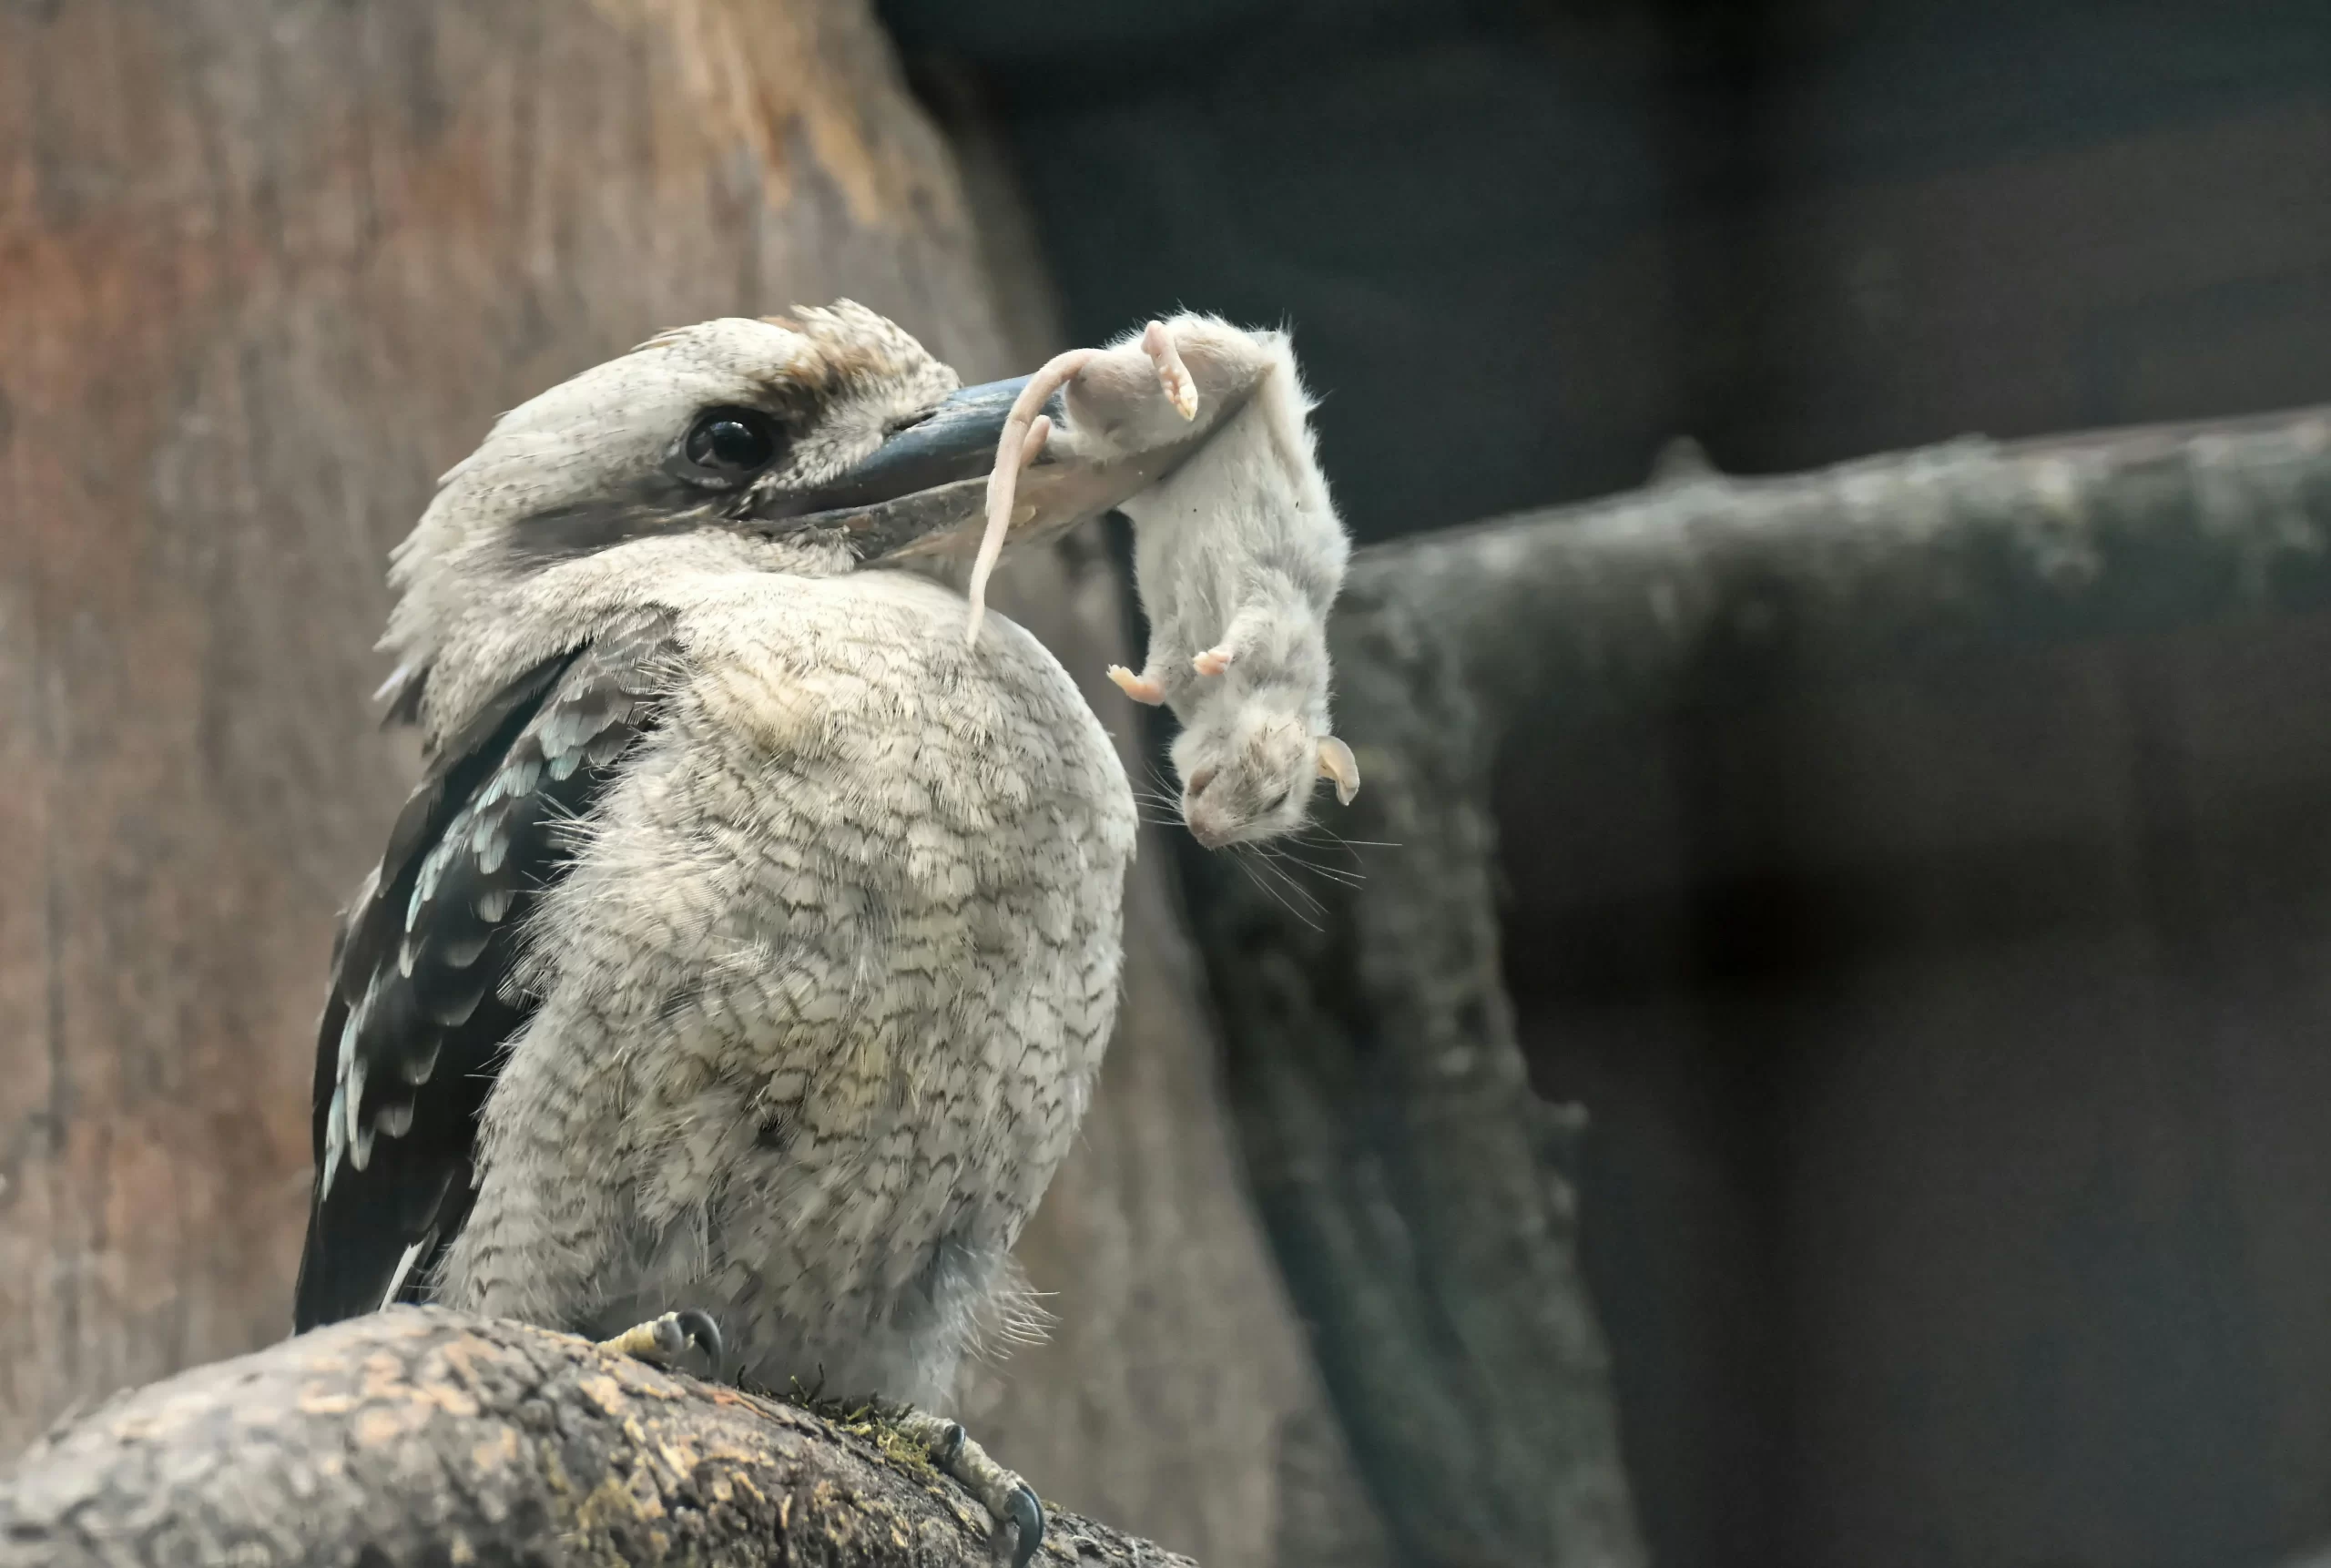 A Laughing Kookaburra holds a mouse in its beak.